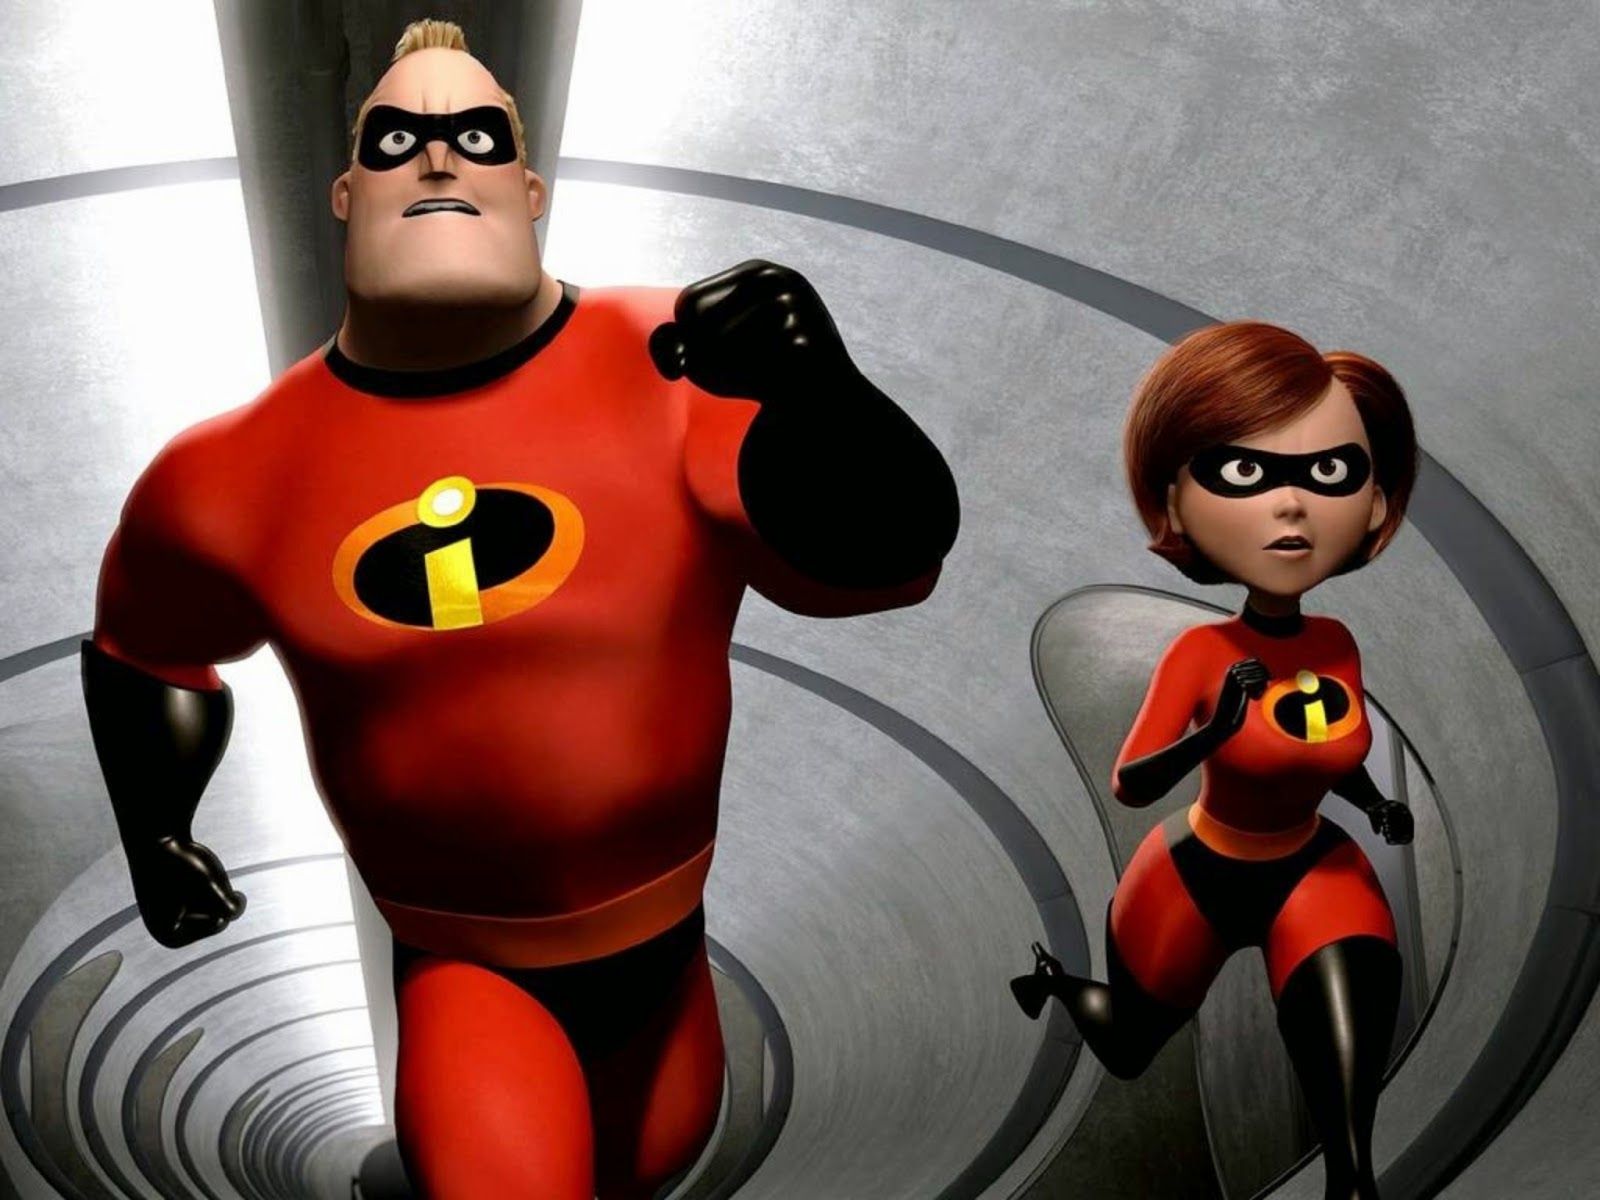 The Pixie Dust Posse. The incredibles, The incredibles Pixar films